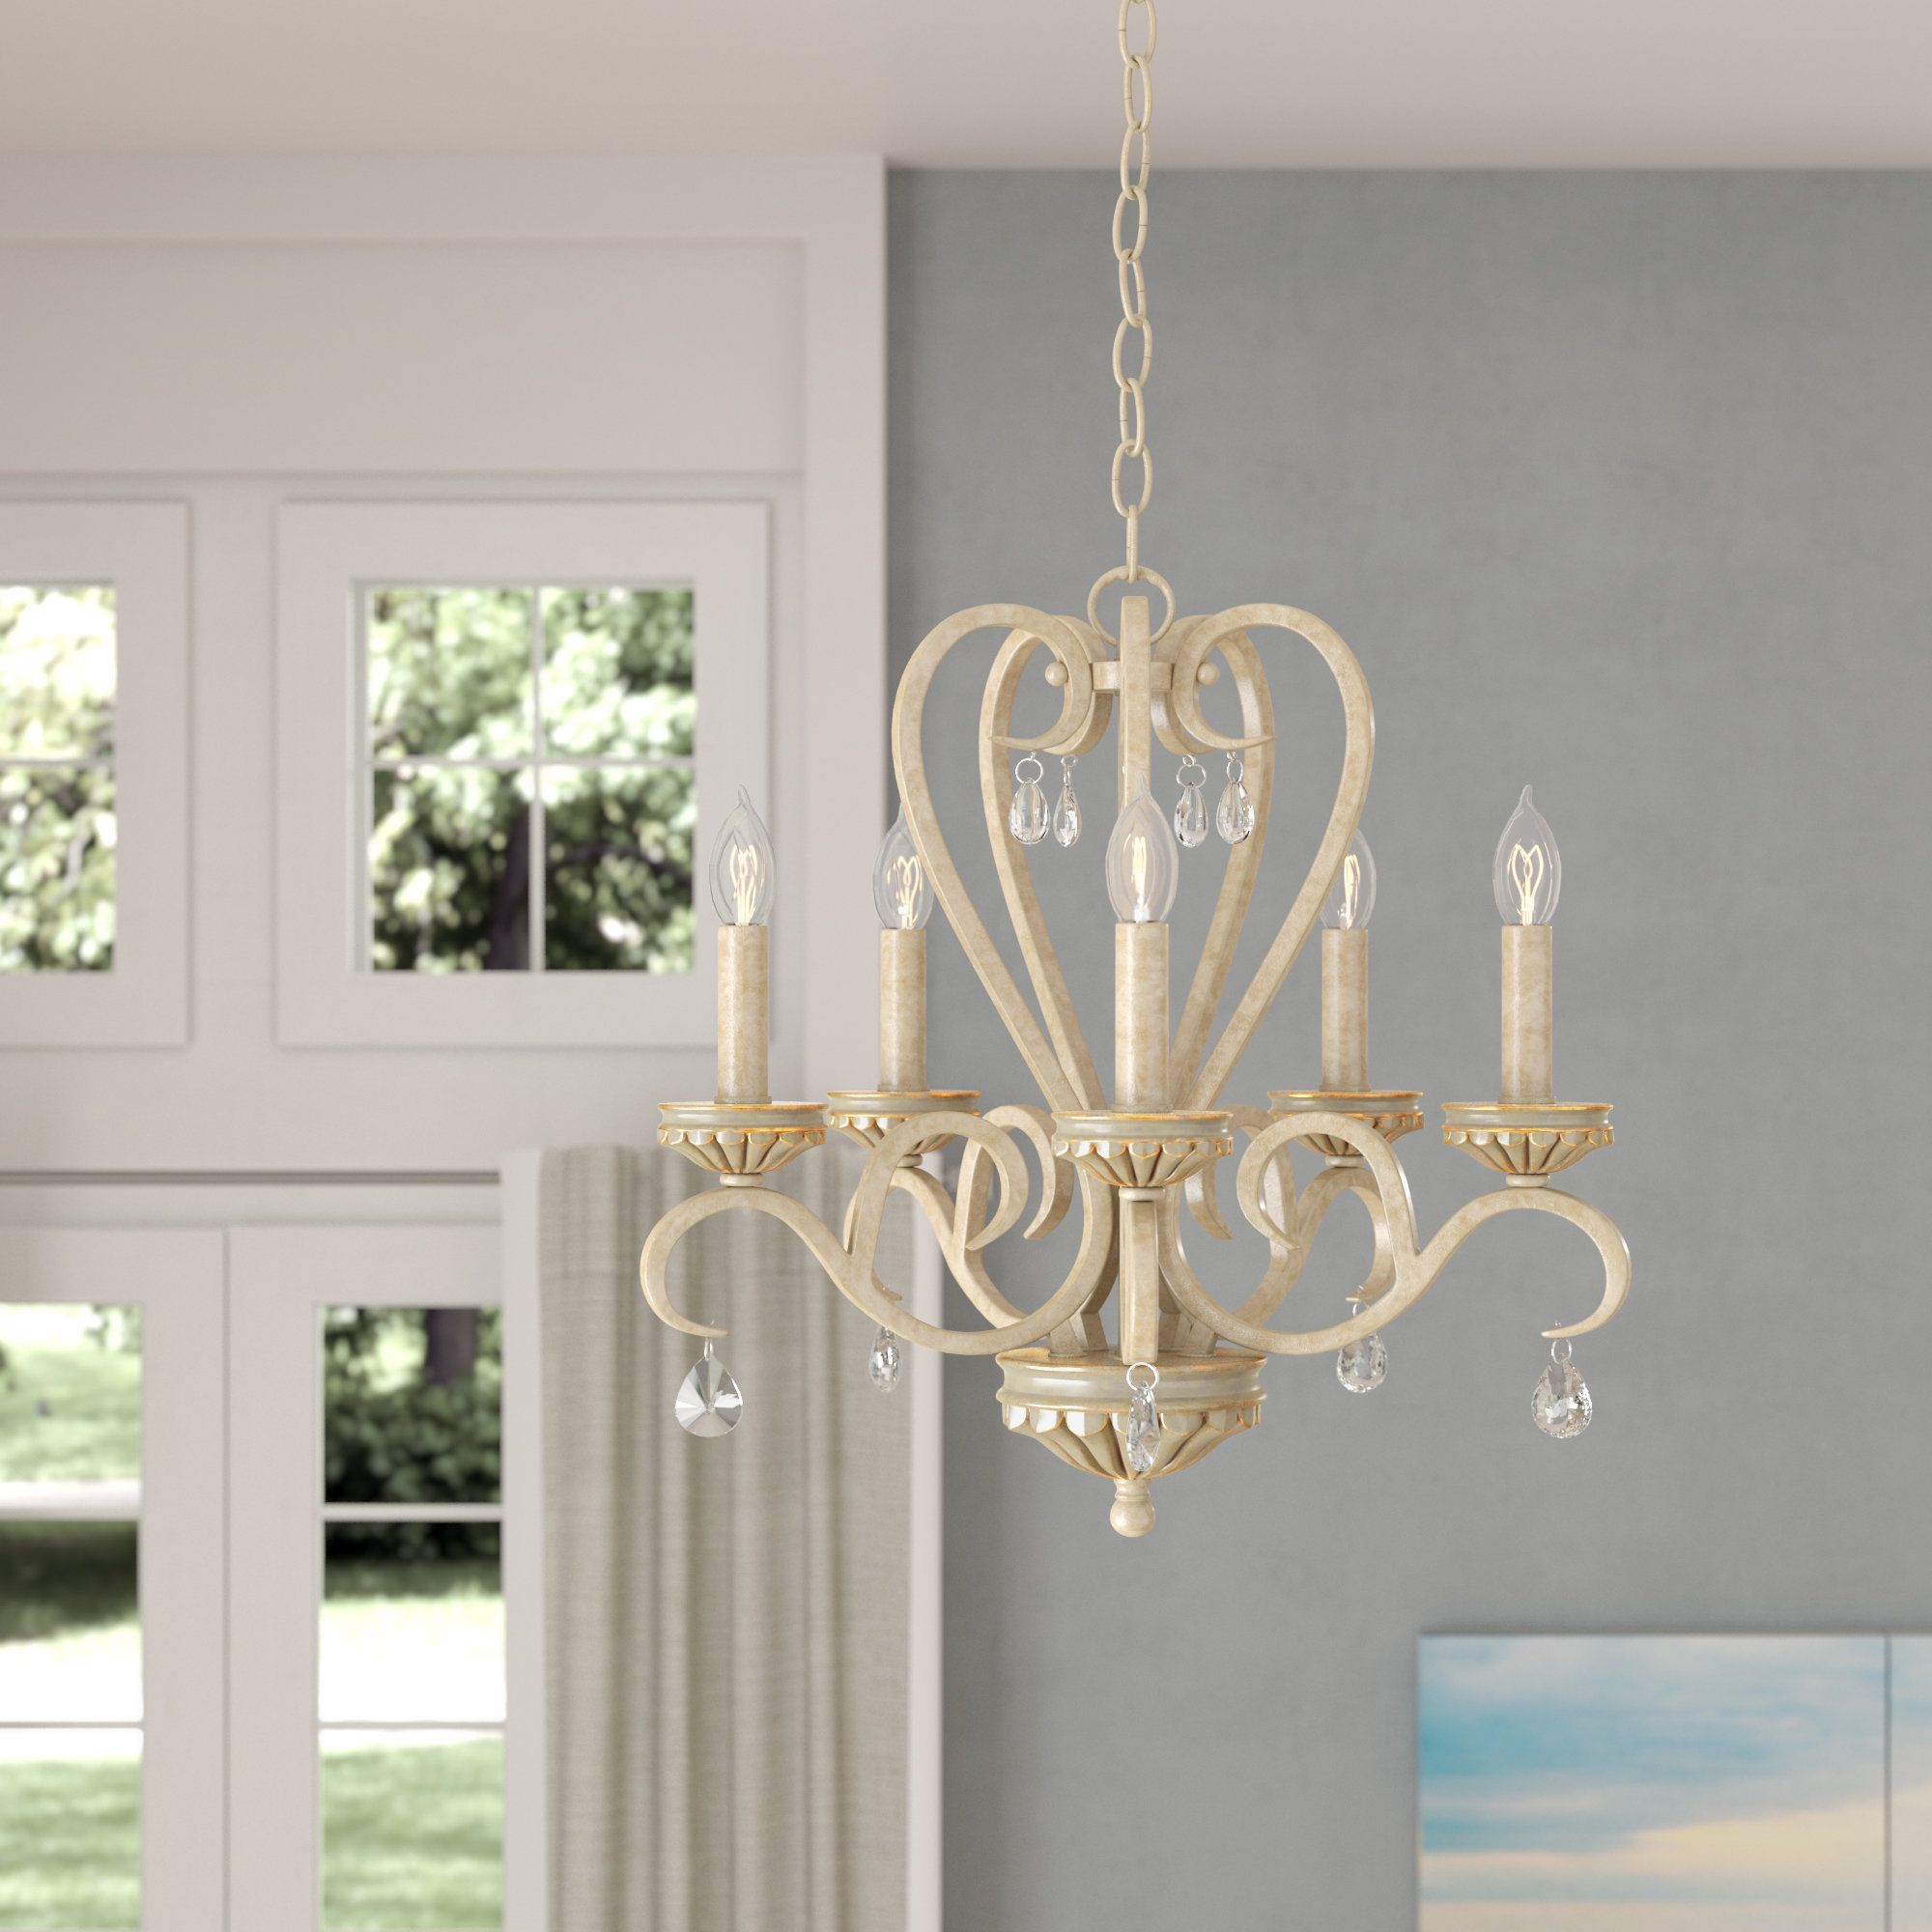 Khaled 5 Light Candle Style Chandelier Intended For Blanchette 5 Light Candle Style Chandeliers (View 6 of 30)